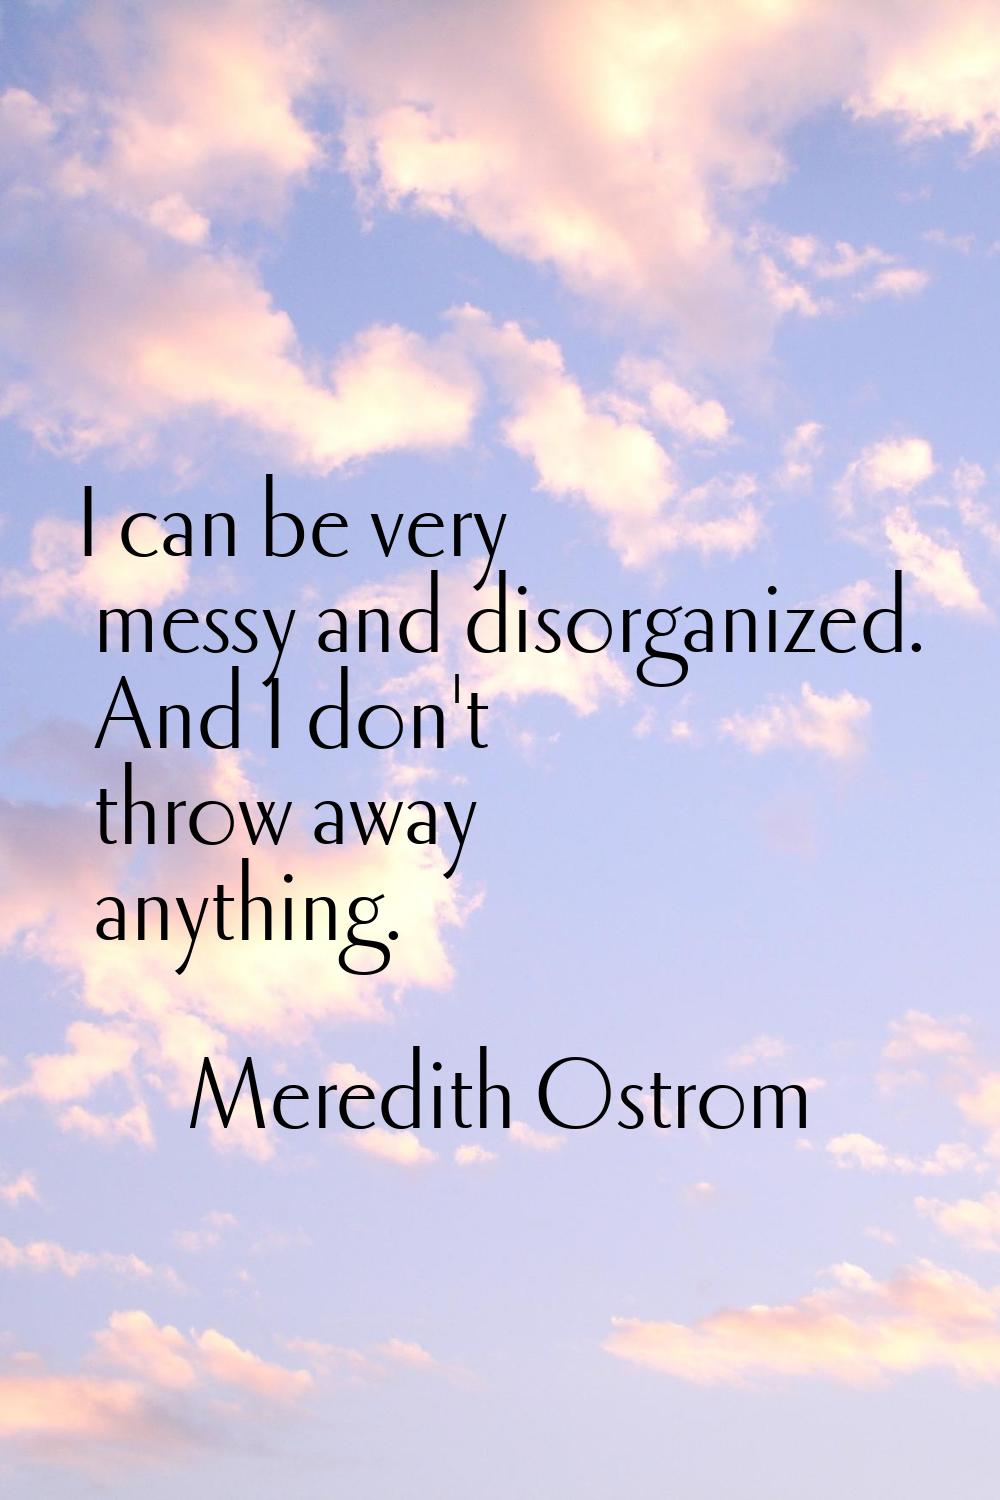 I can be very messy and disorganized. And I don't throw away anything.